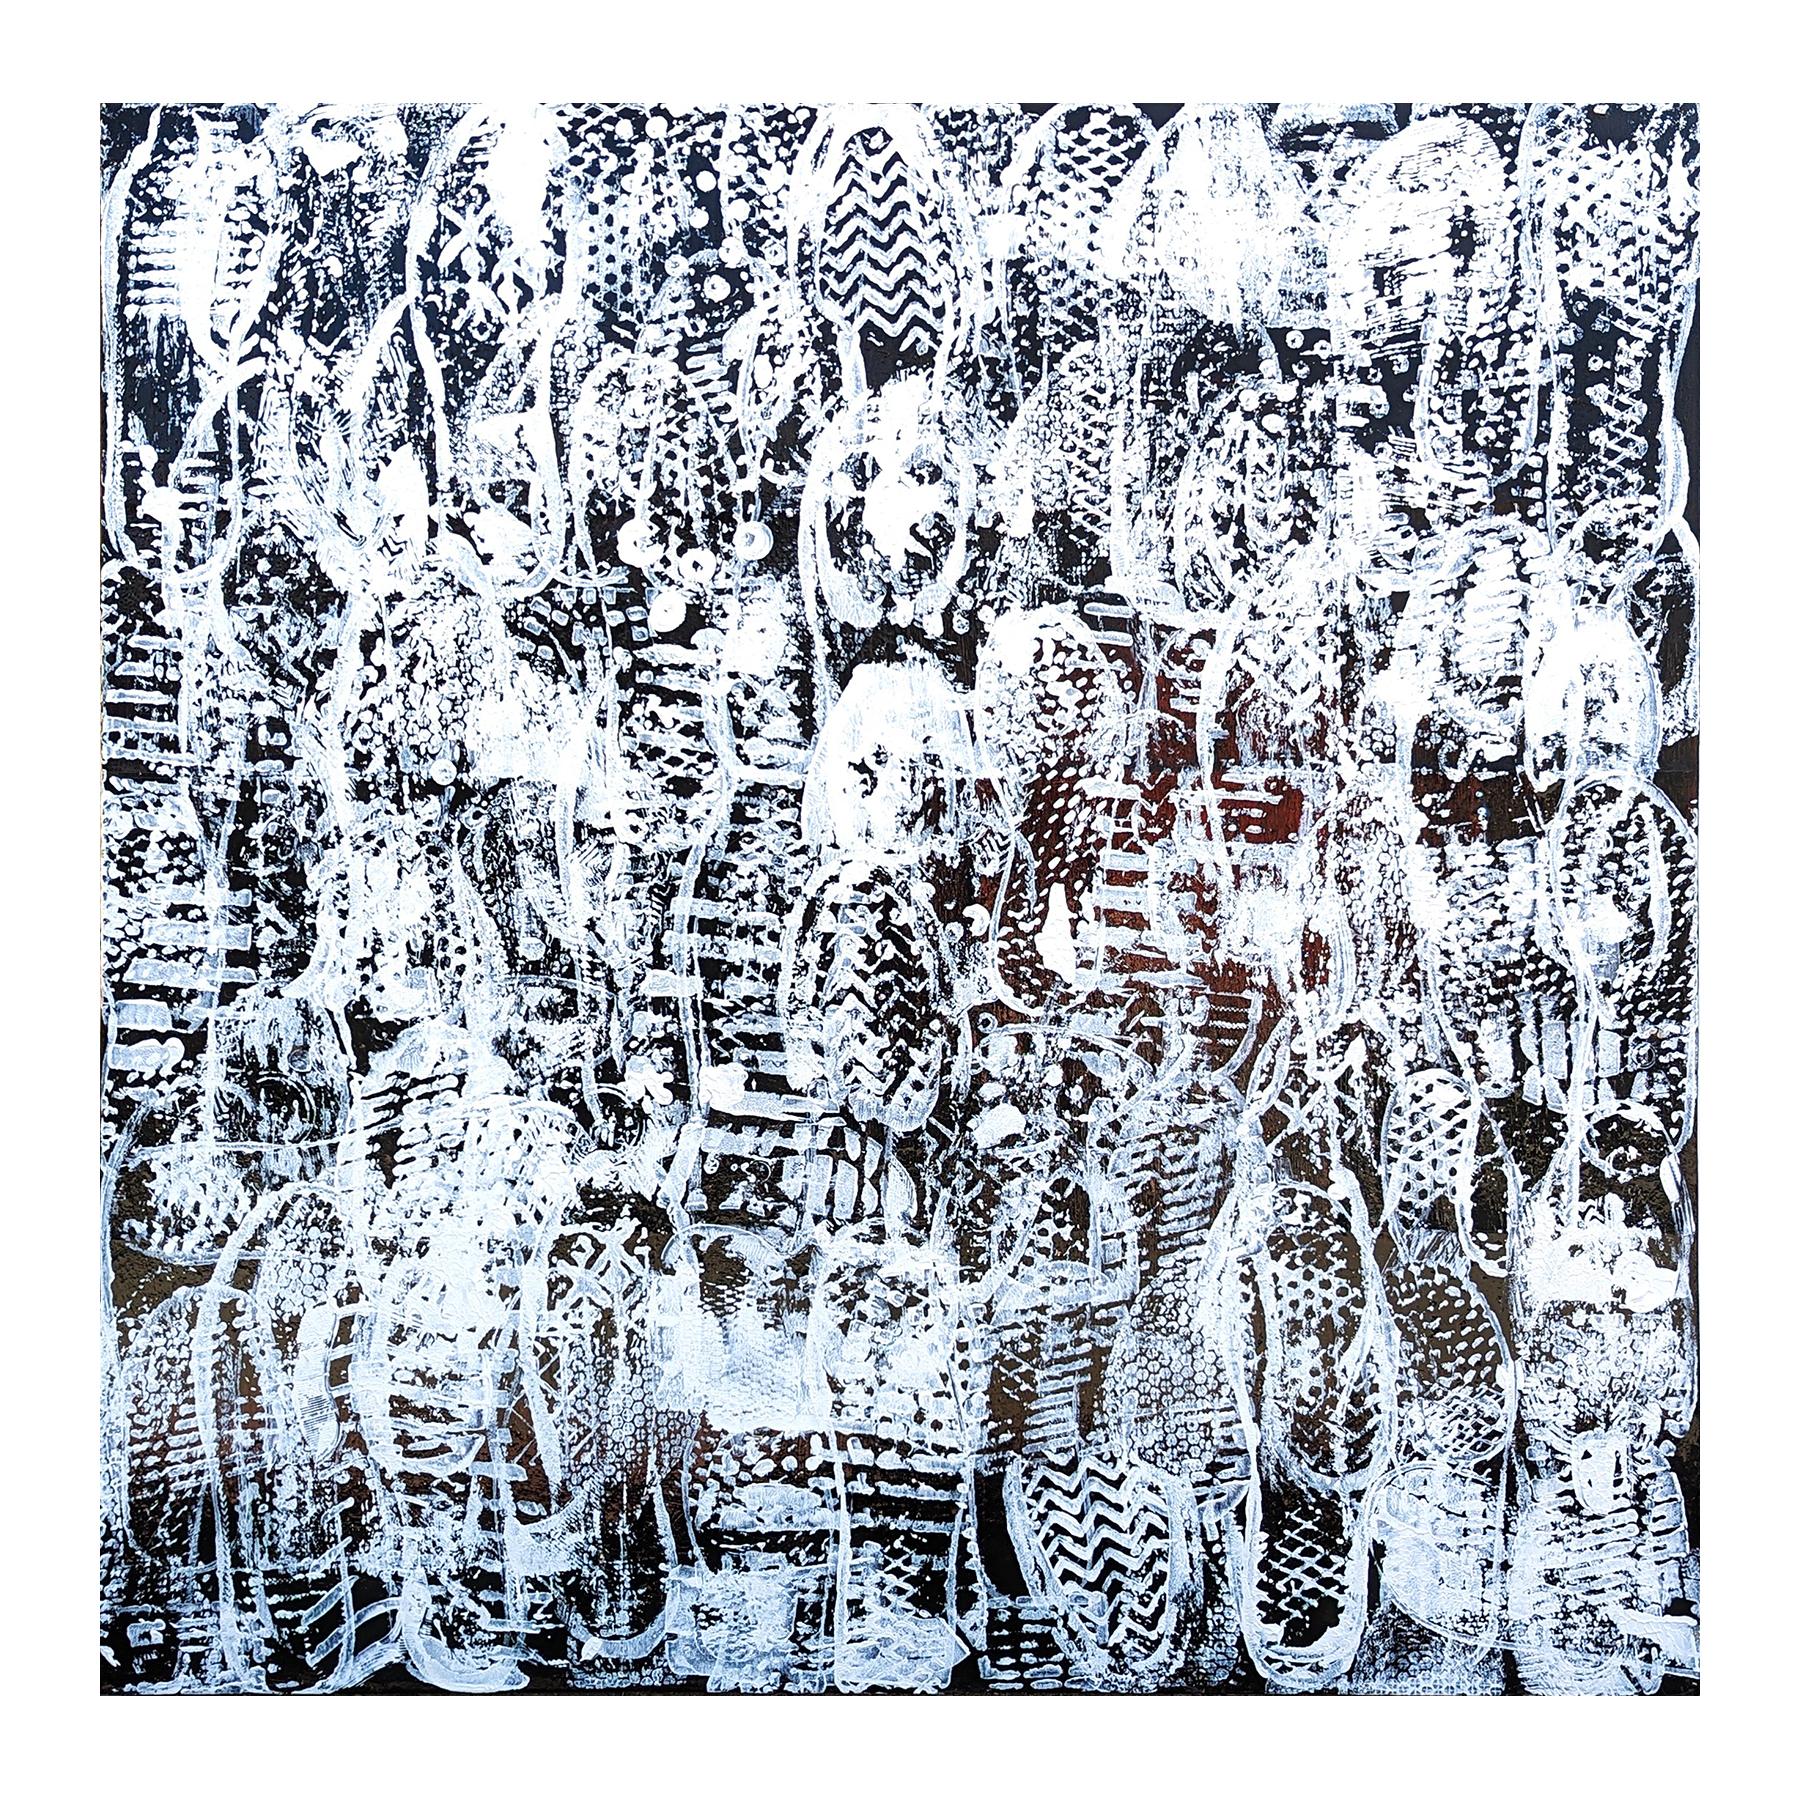 Black and white abstract contemporary painting by Houston, TX artist Tra' Slaughter. The painting features an excerpt written in black sans-serif letters all over the white canvas. This piece was included in Tra's solo show 